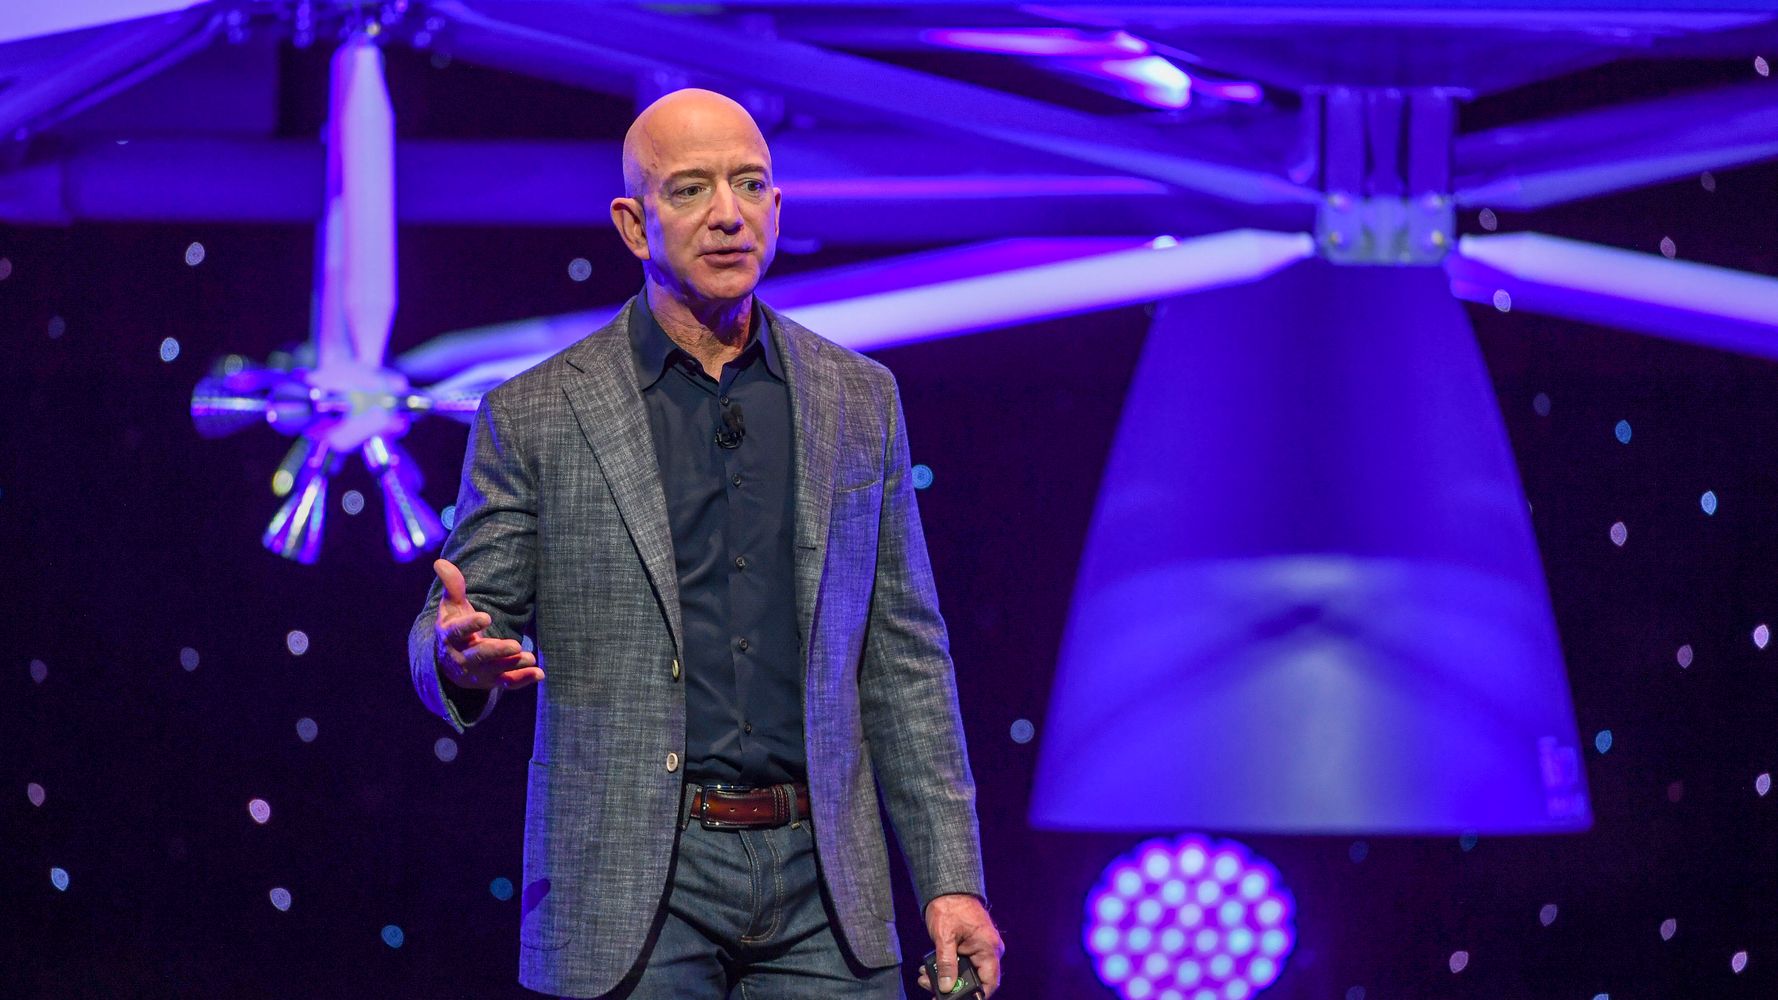 Jeff Bezos Announces He's Going To Space